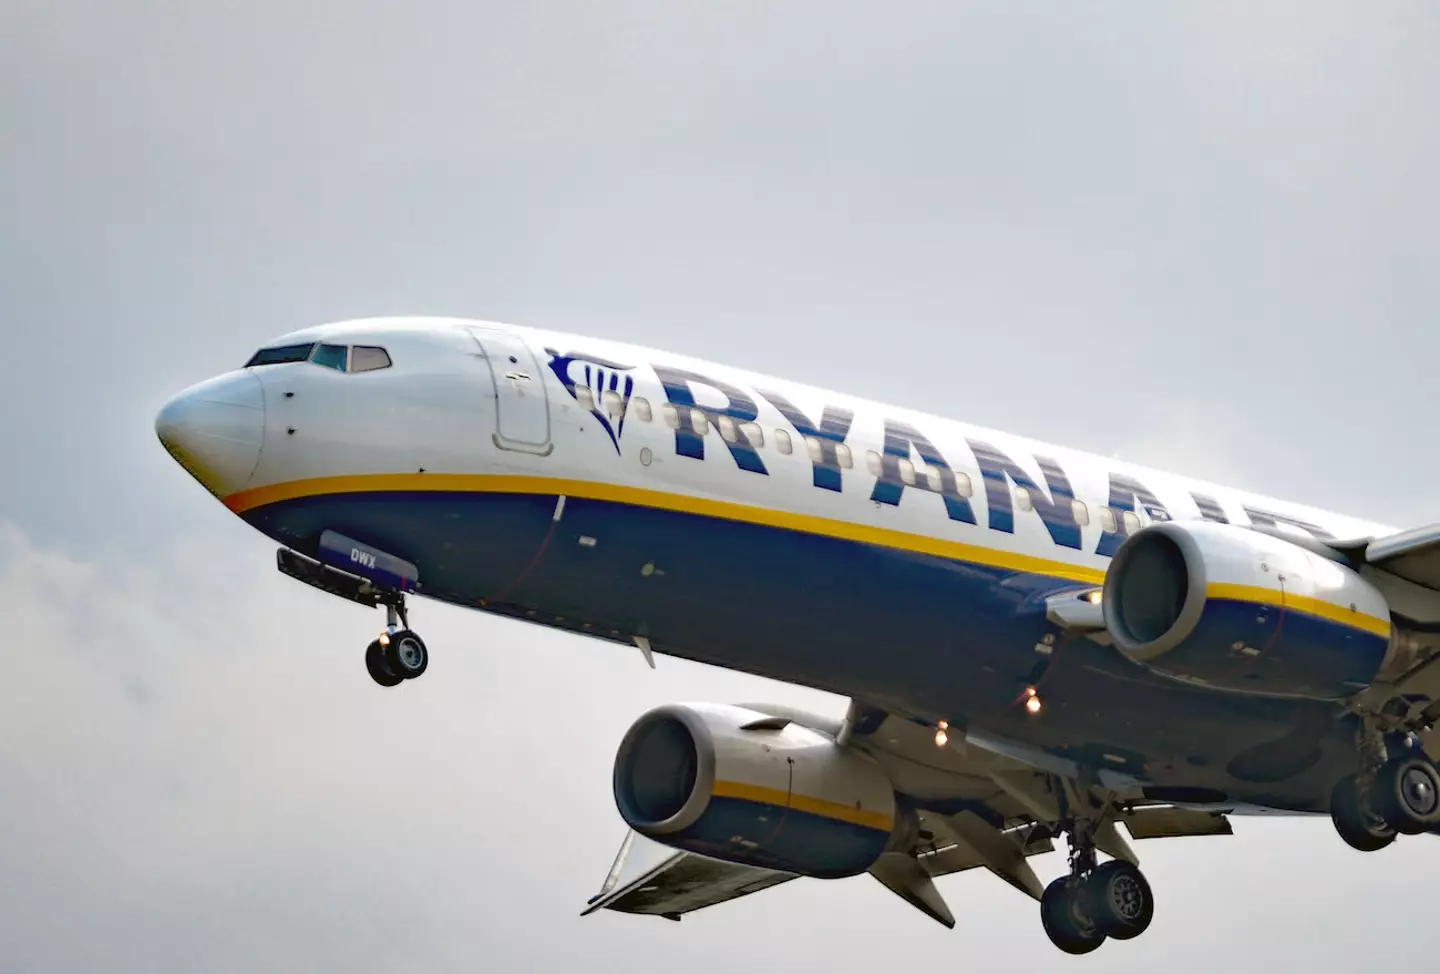 The government of the Balearic Islands has reportedly called for an urgent meeting with Ryanair after the airline allegedly tried to charge passengers who took cakes onboard.